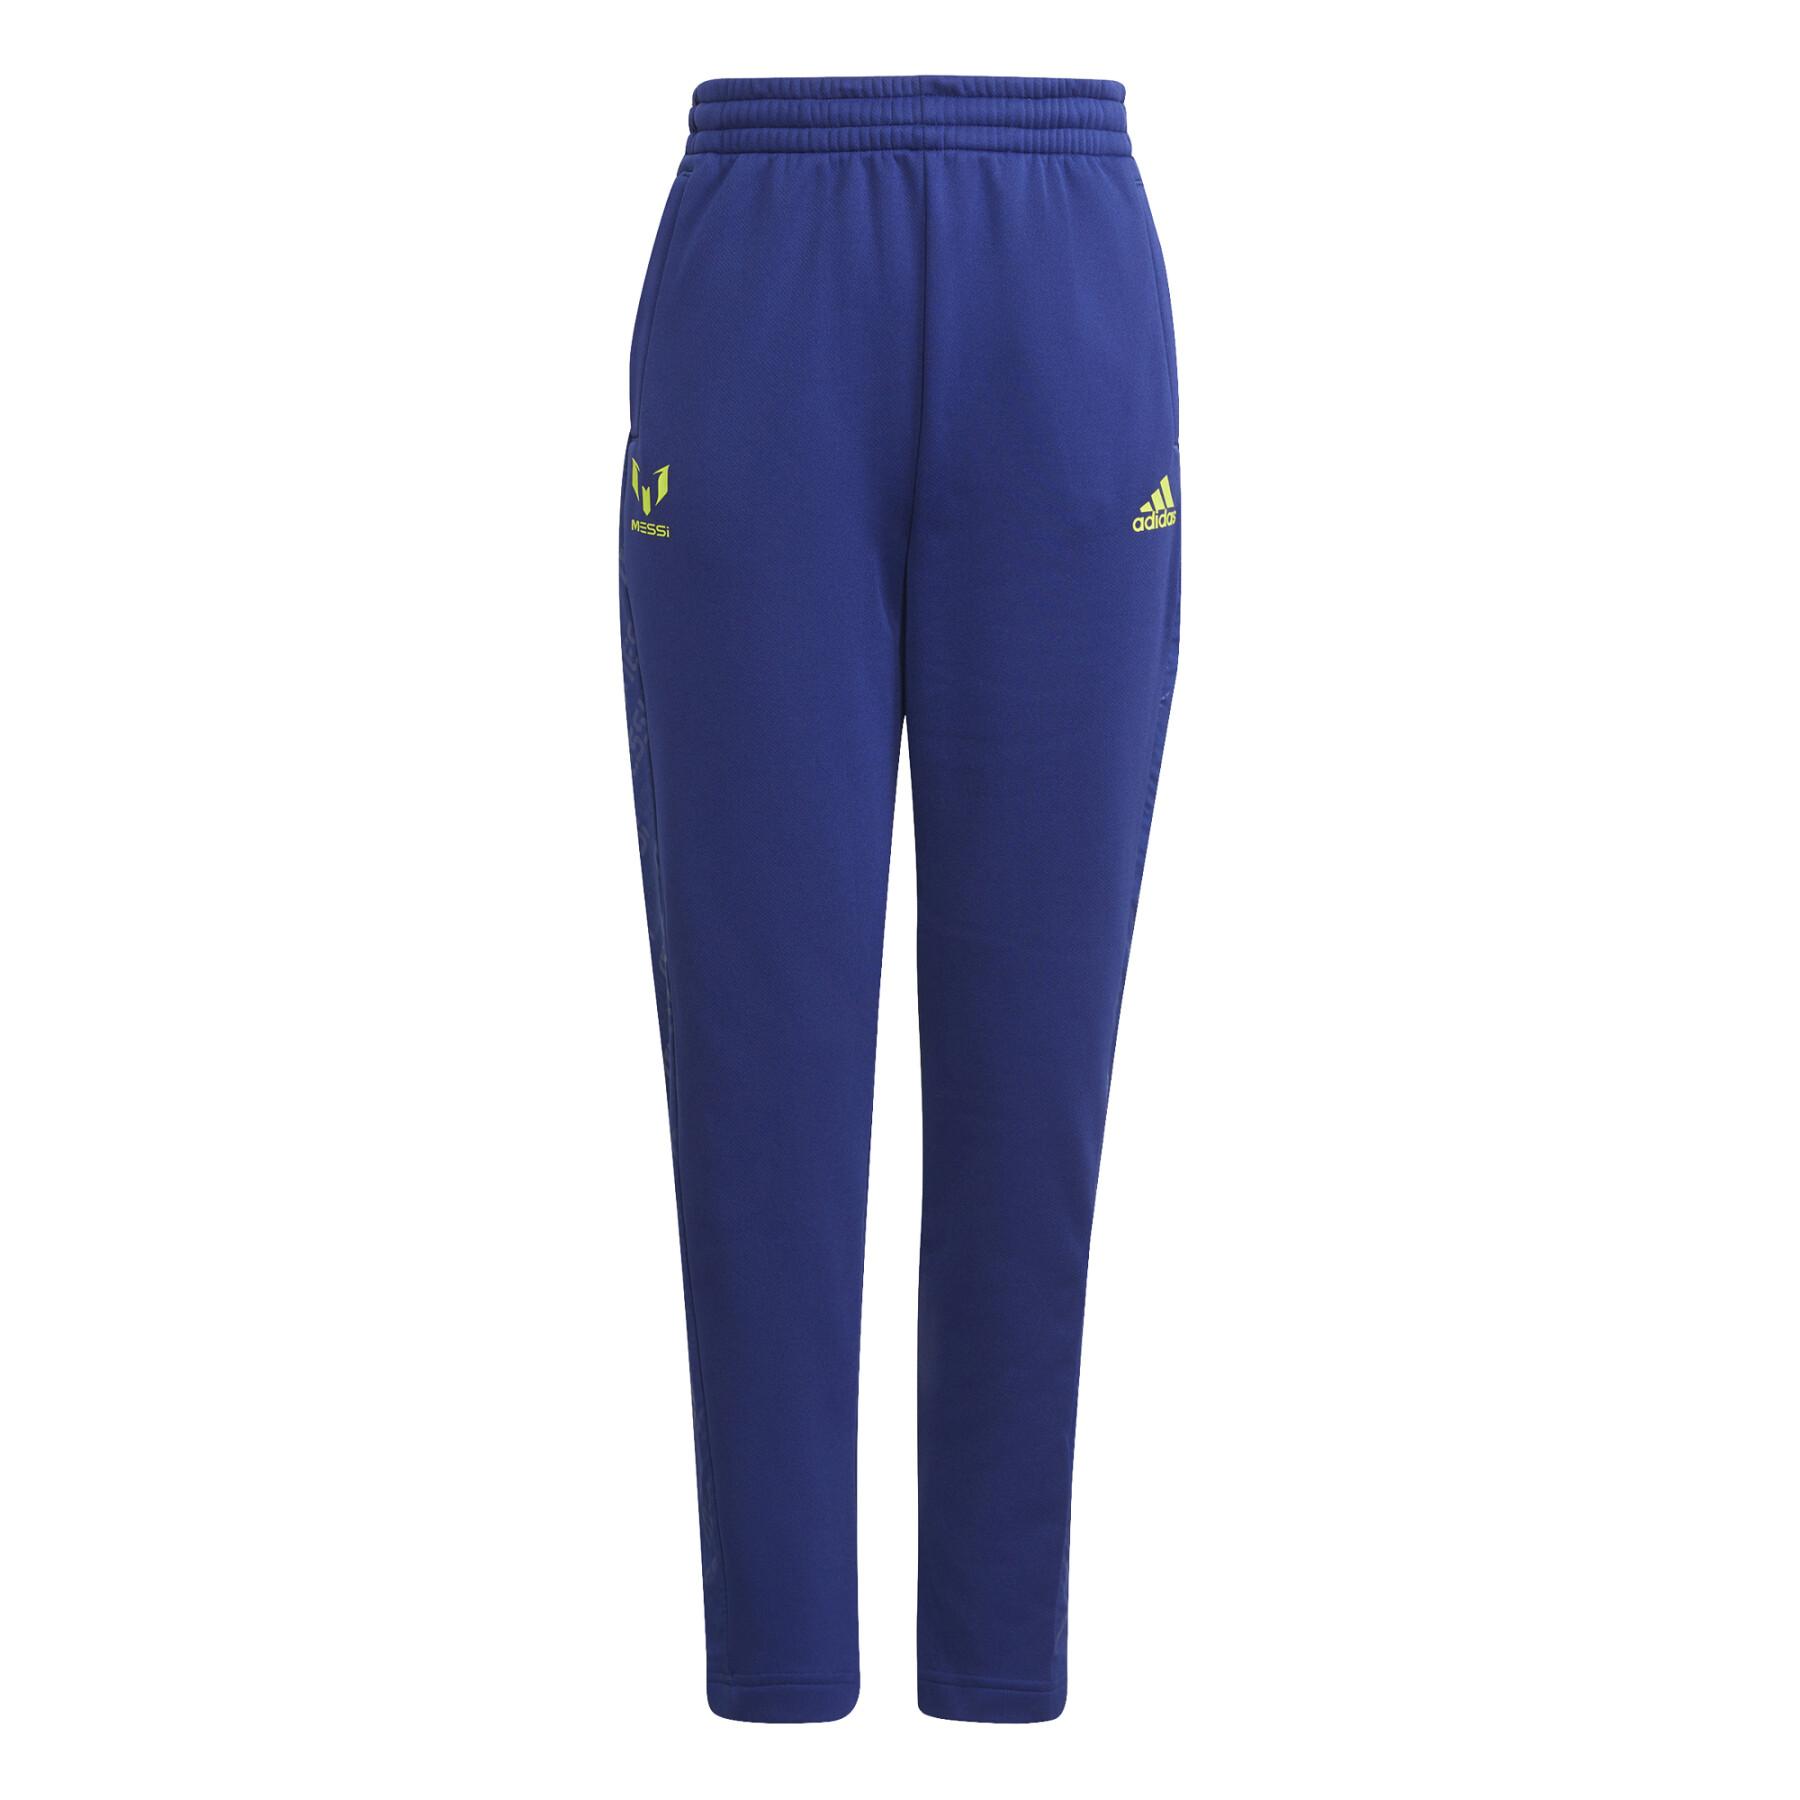 Children's trousers adidas AEROREADY Messi Football-Inspired Tapered